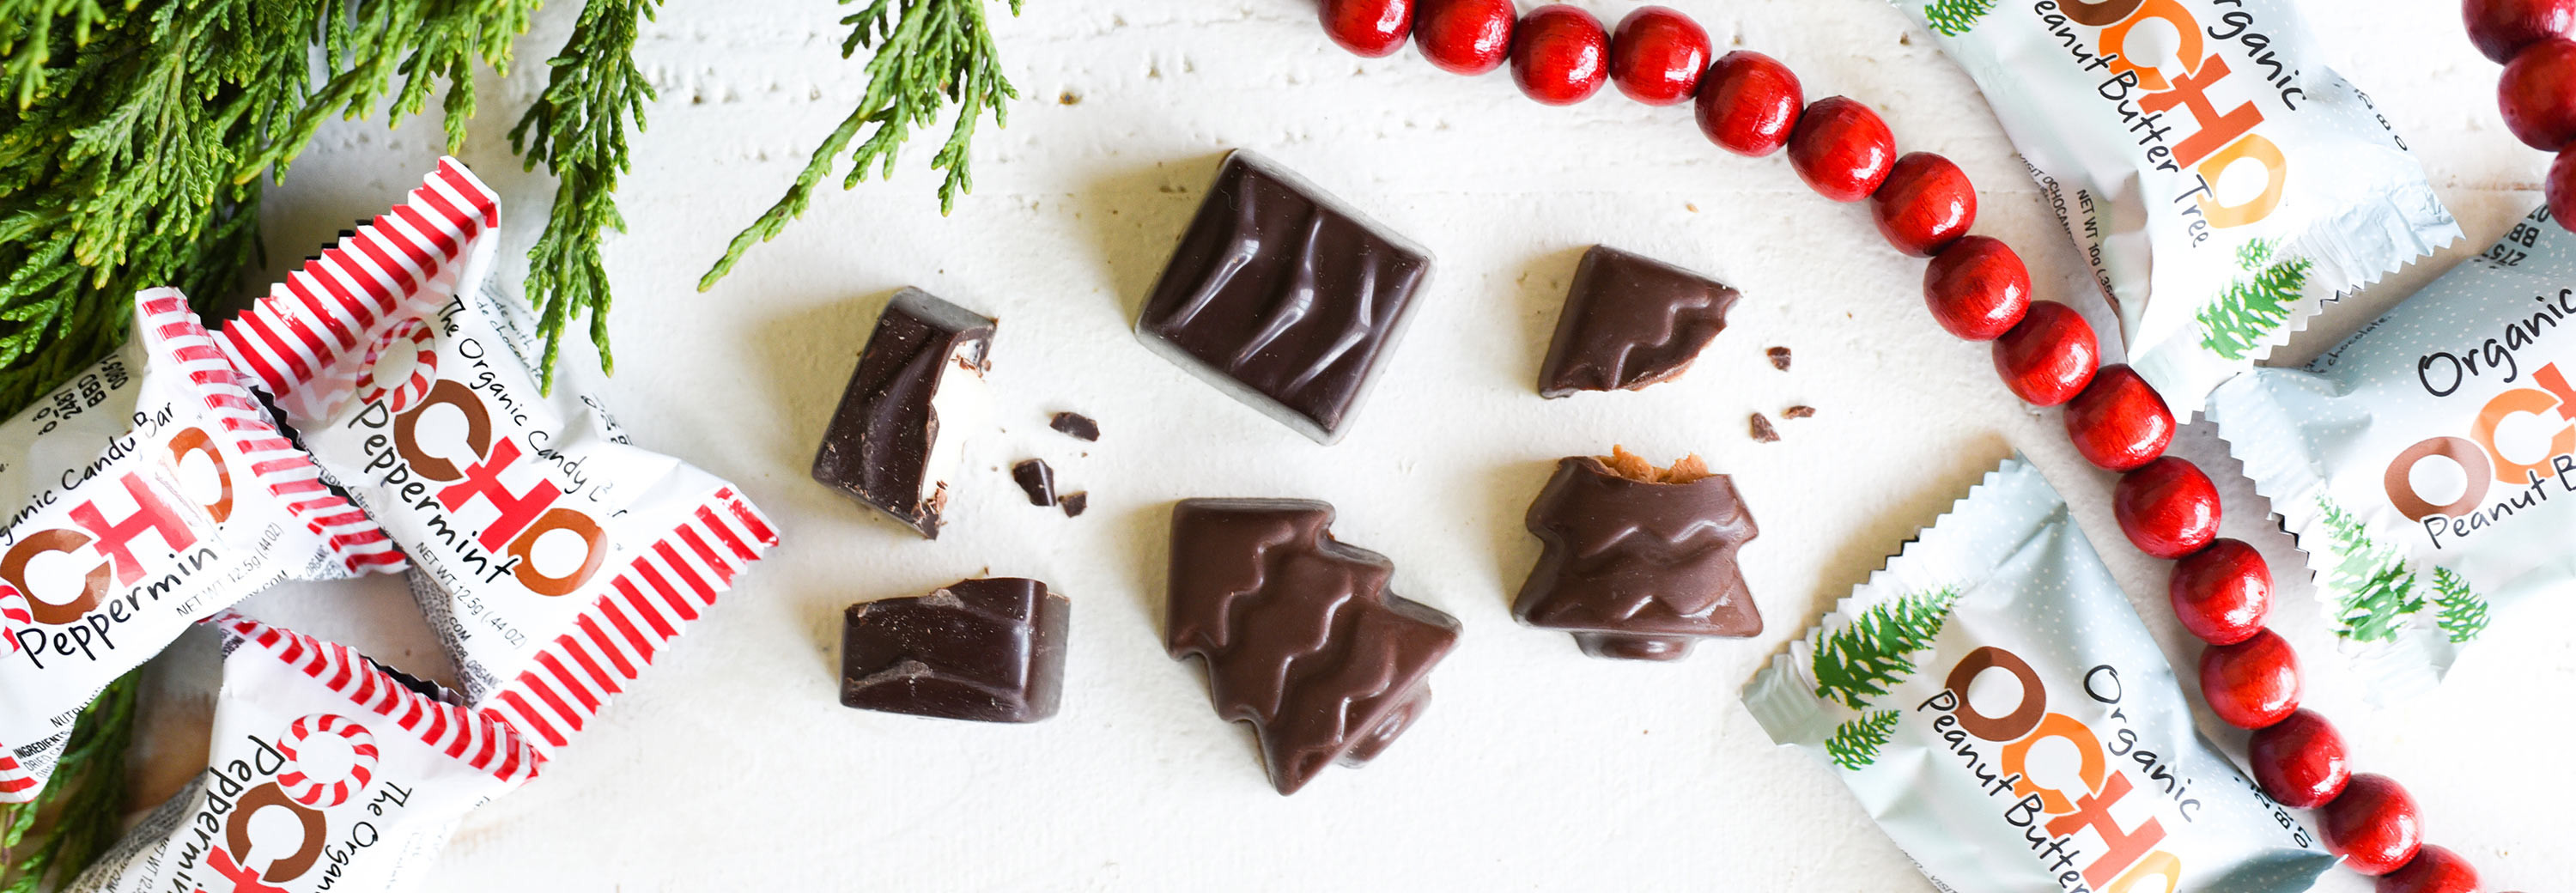 Organic Christmas Candy
 Organic Christmas Chocolate Candy Subscriptions from OCHO